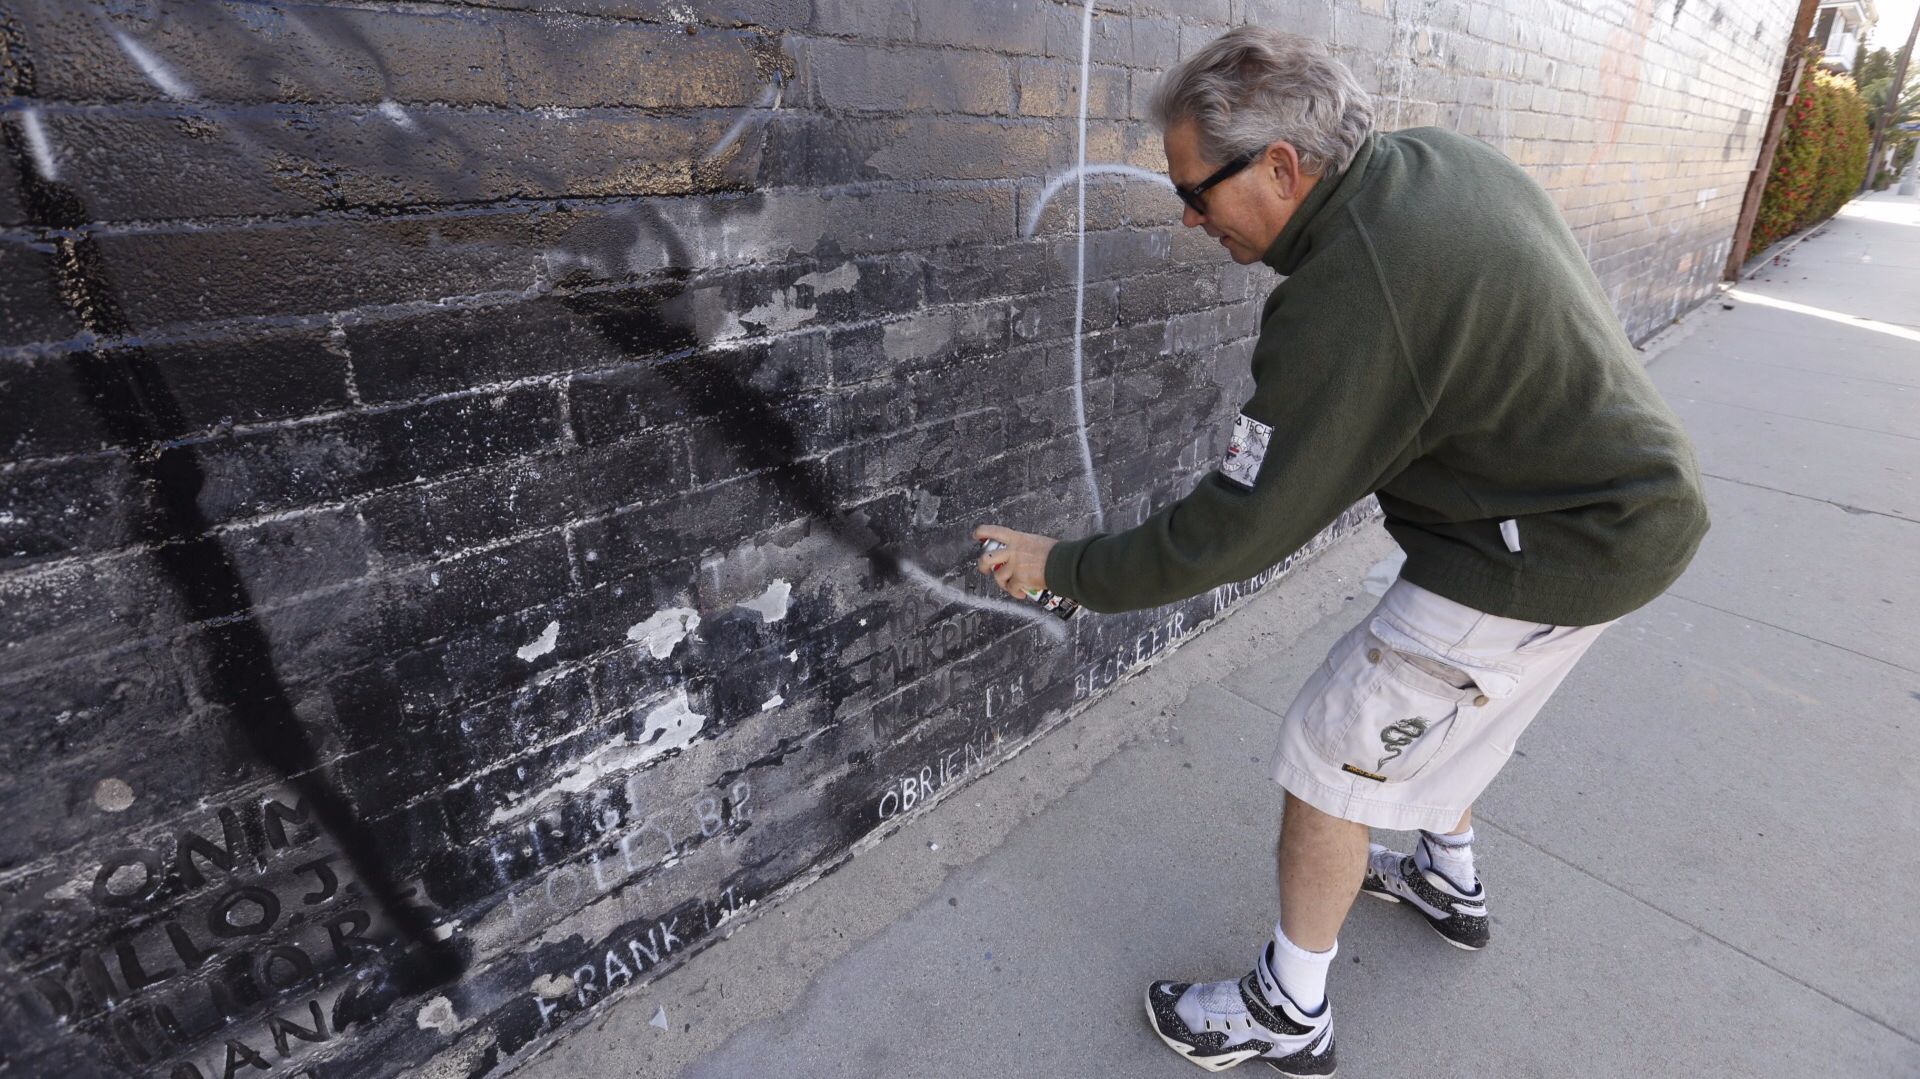 Steven Barber uses black spray paint to cover the white letters of graffiti on the wall.